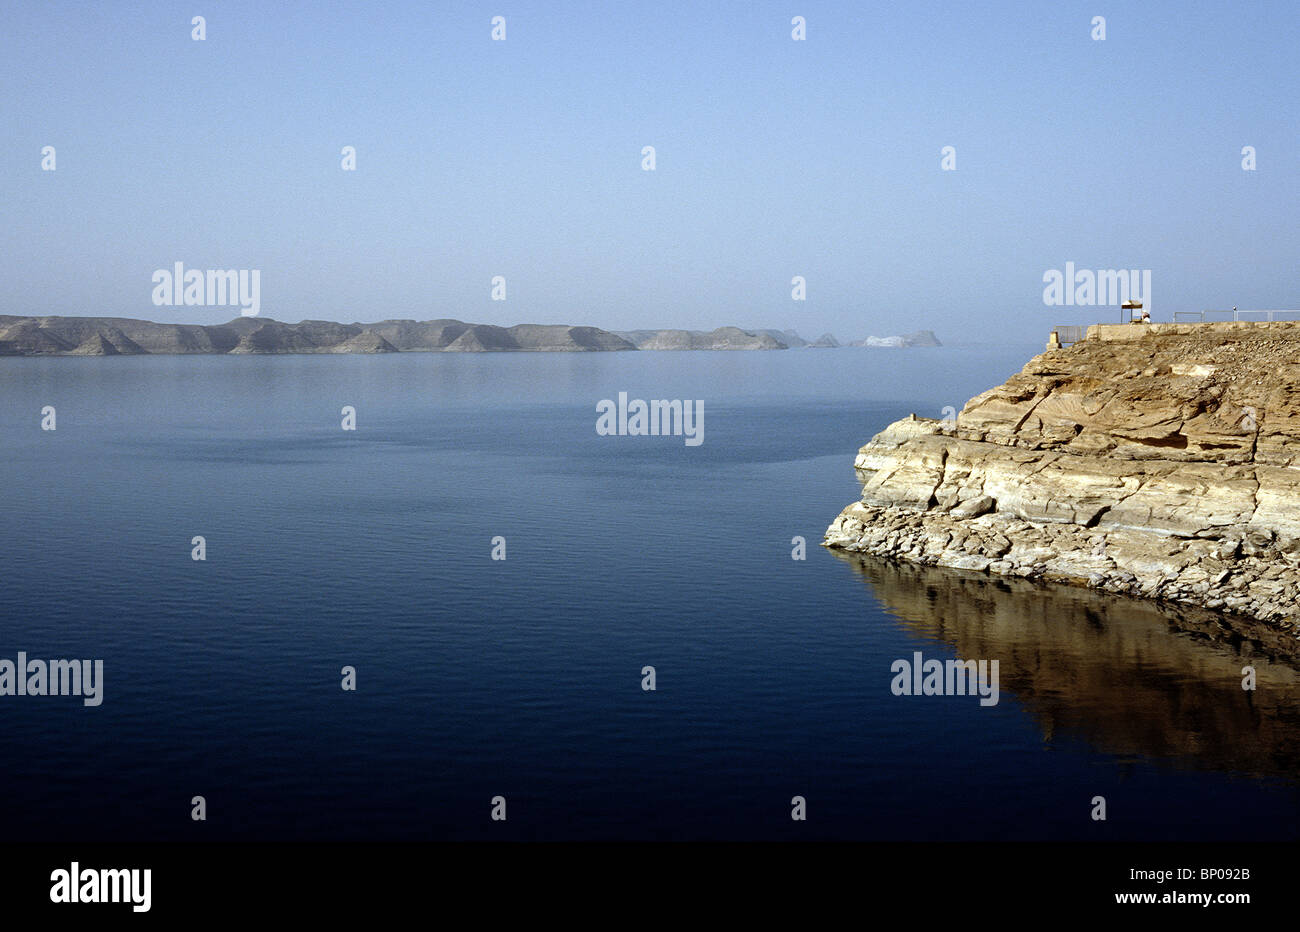 View of Lake Nasser at the Egyptian border to Sudan. Stock Photo